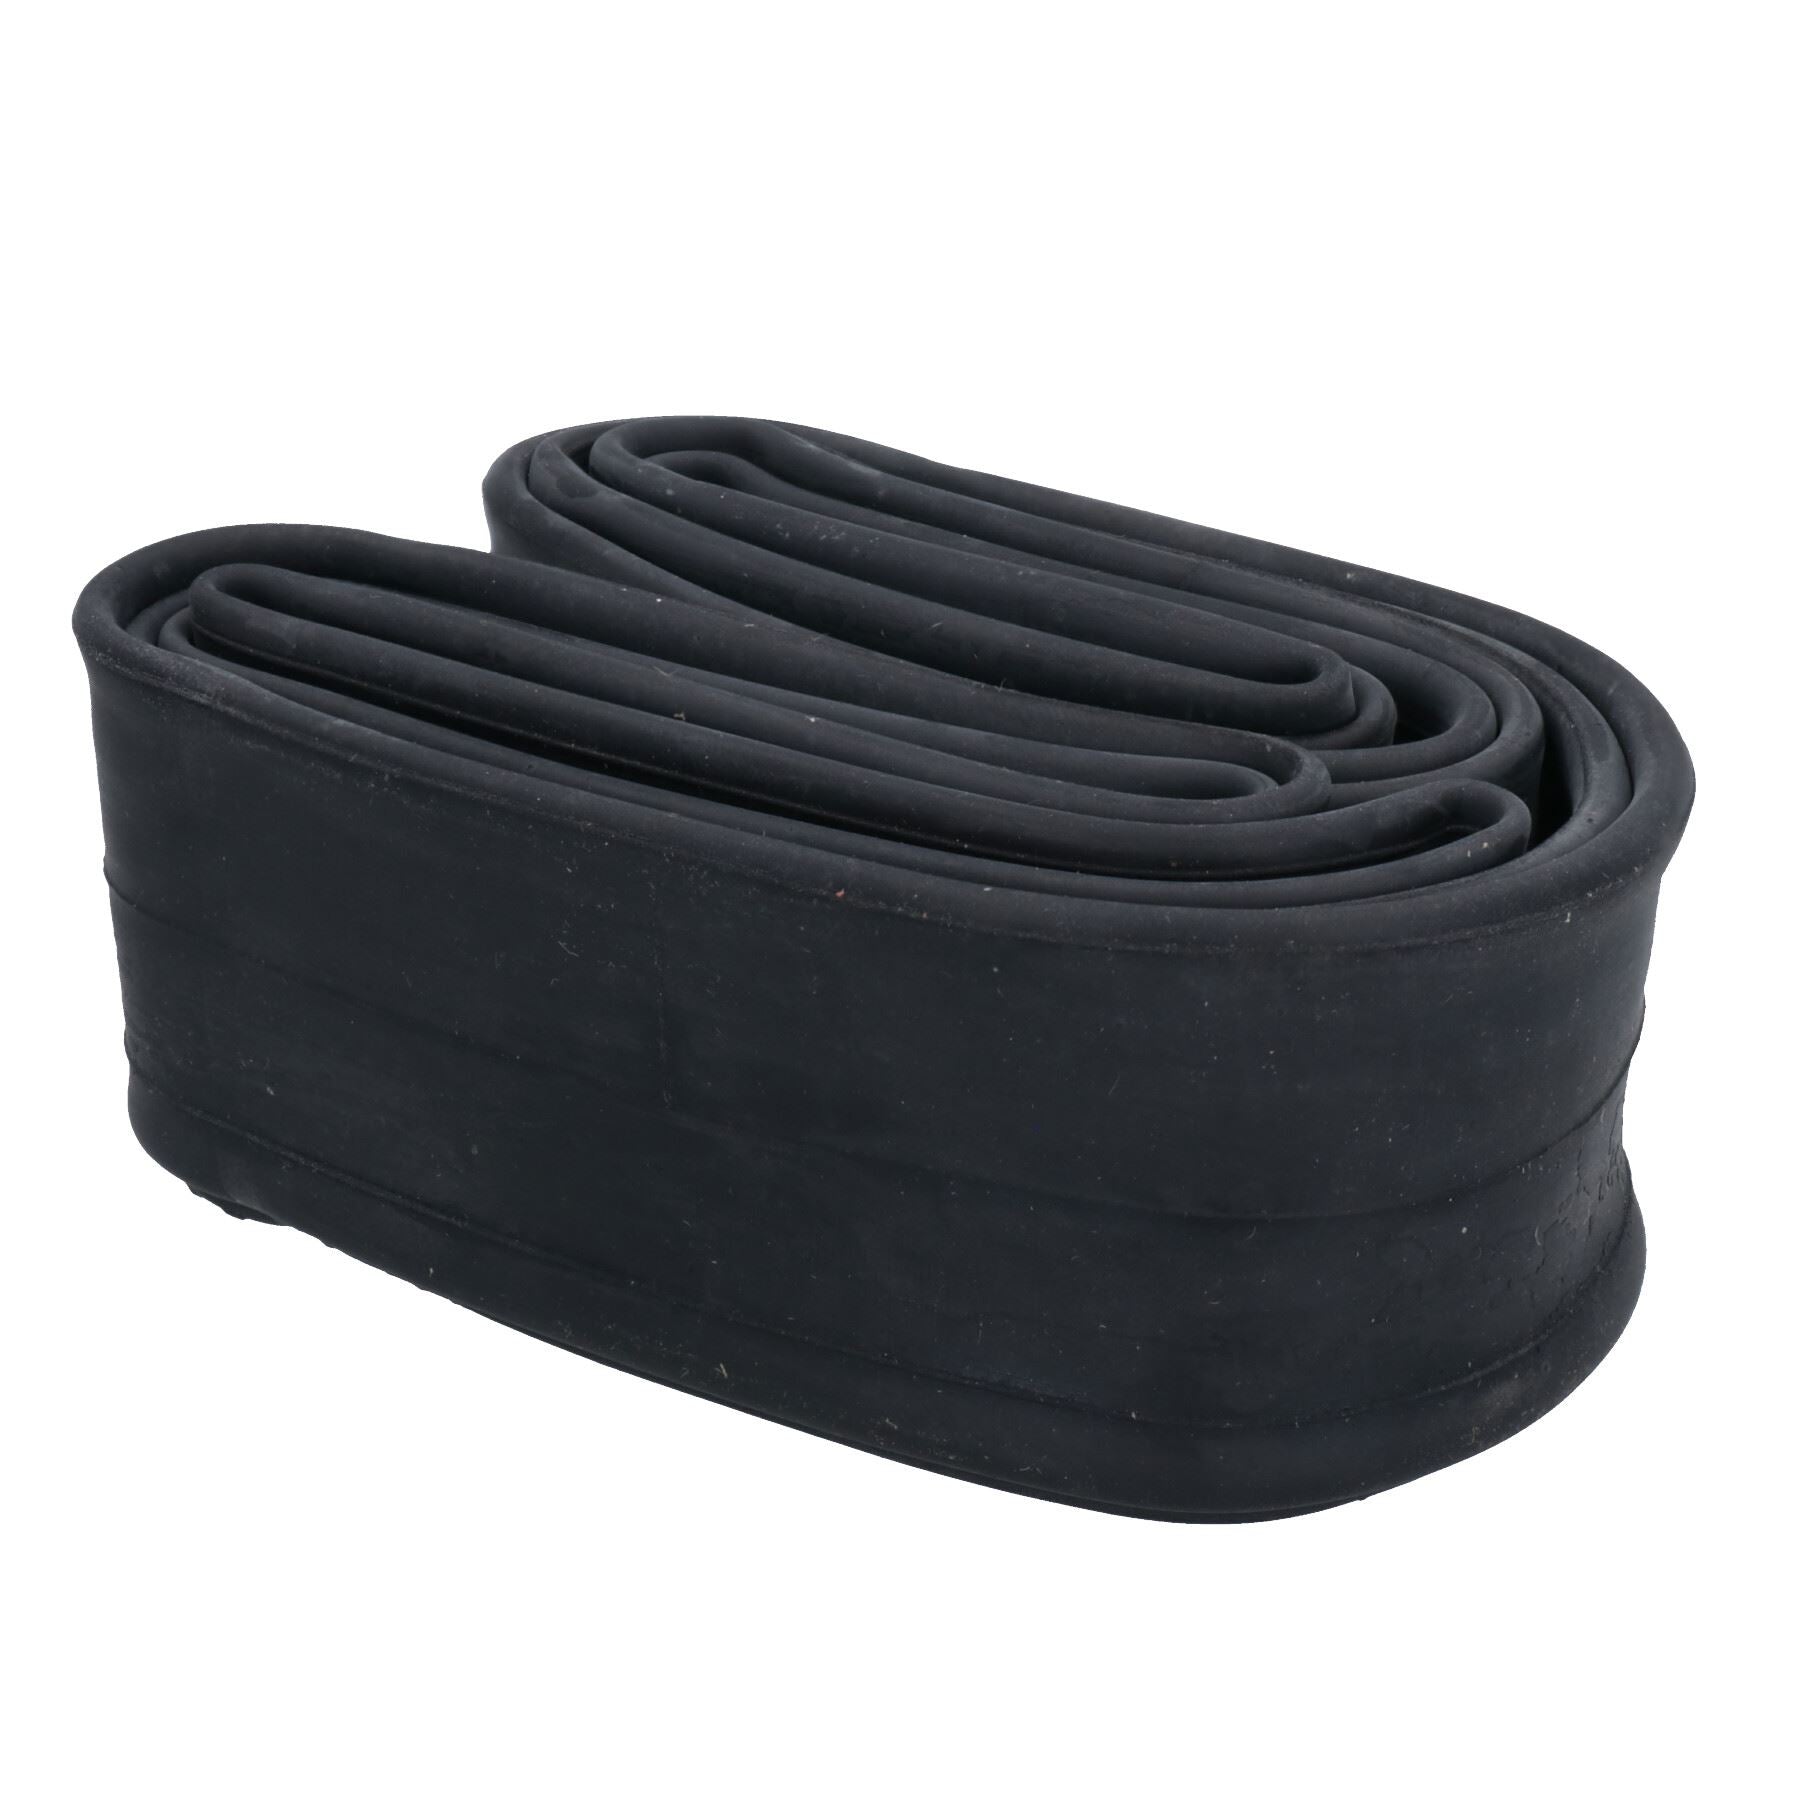 26” Bicycle Bike Cycle Inner Tube Schrader Valve for Tyres 1.75” – 2.125” Wide